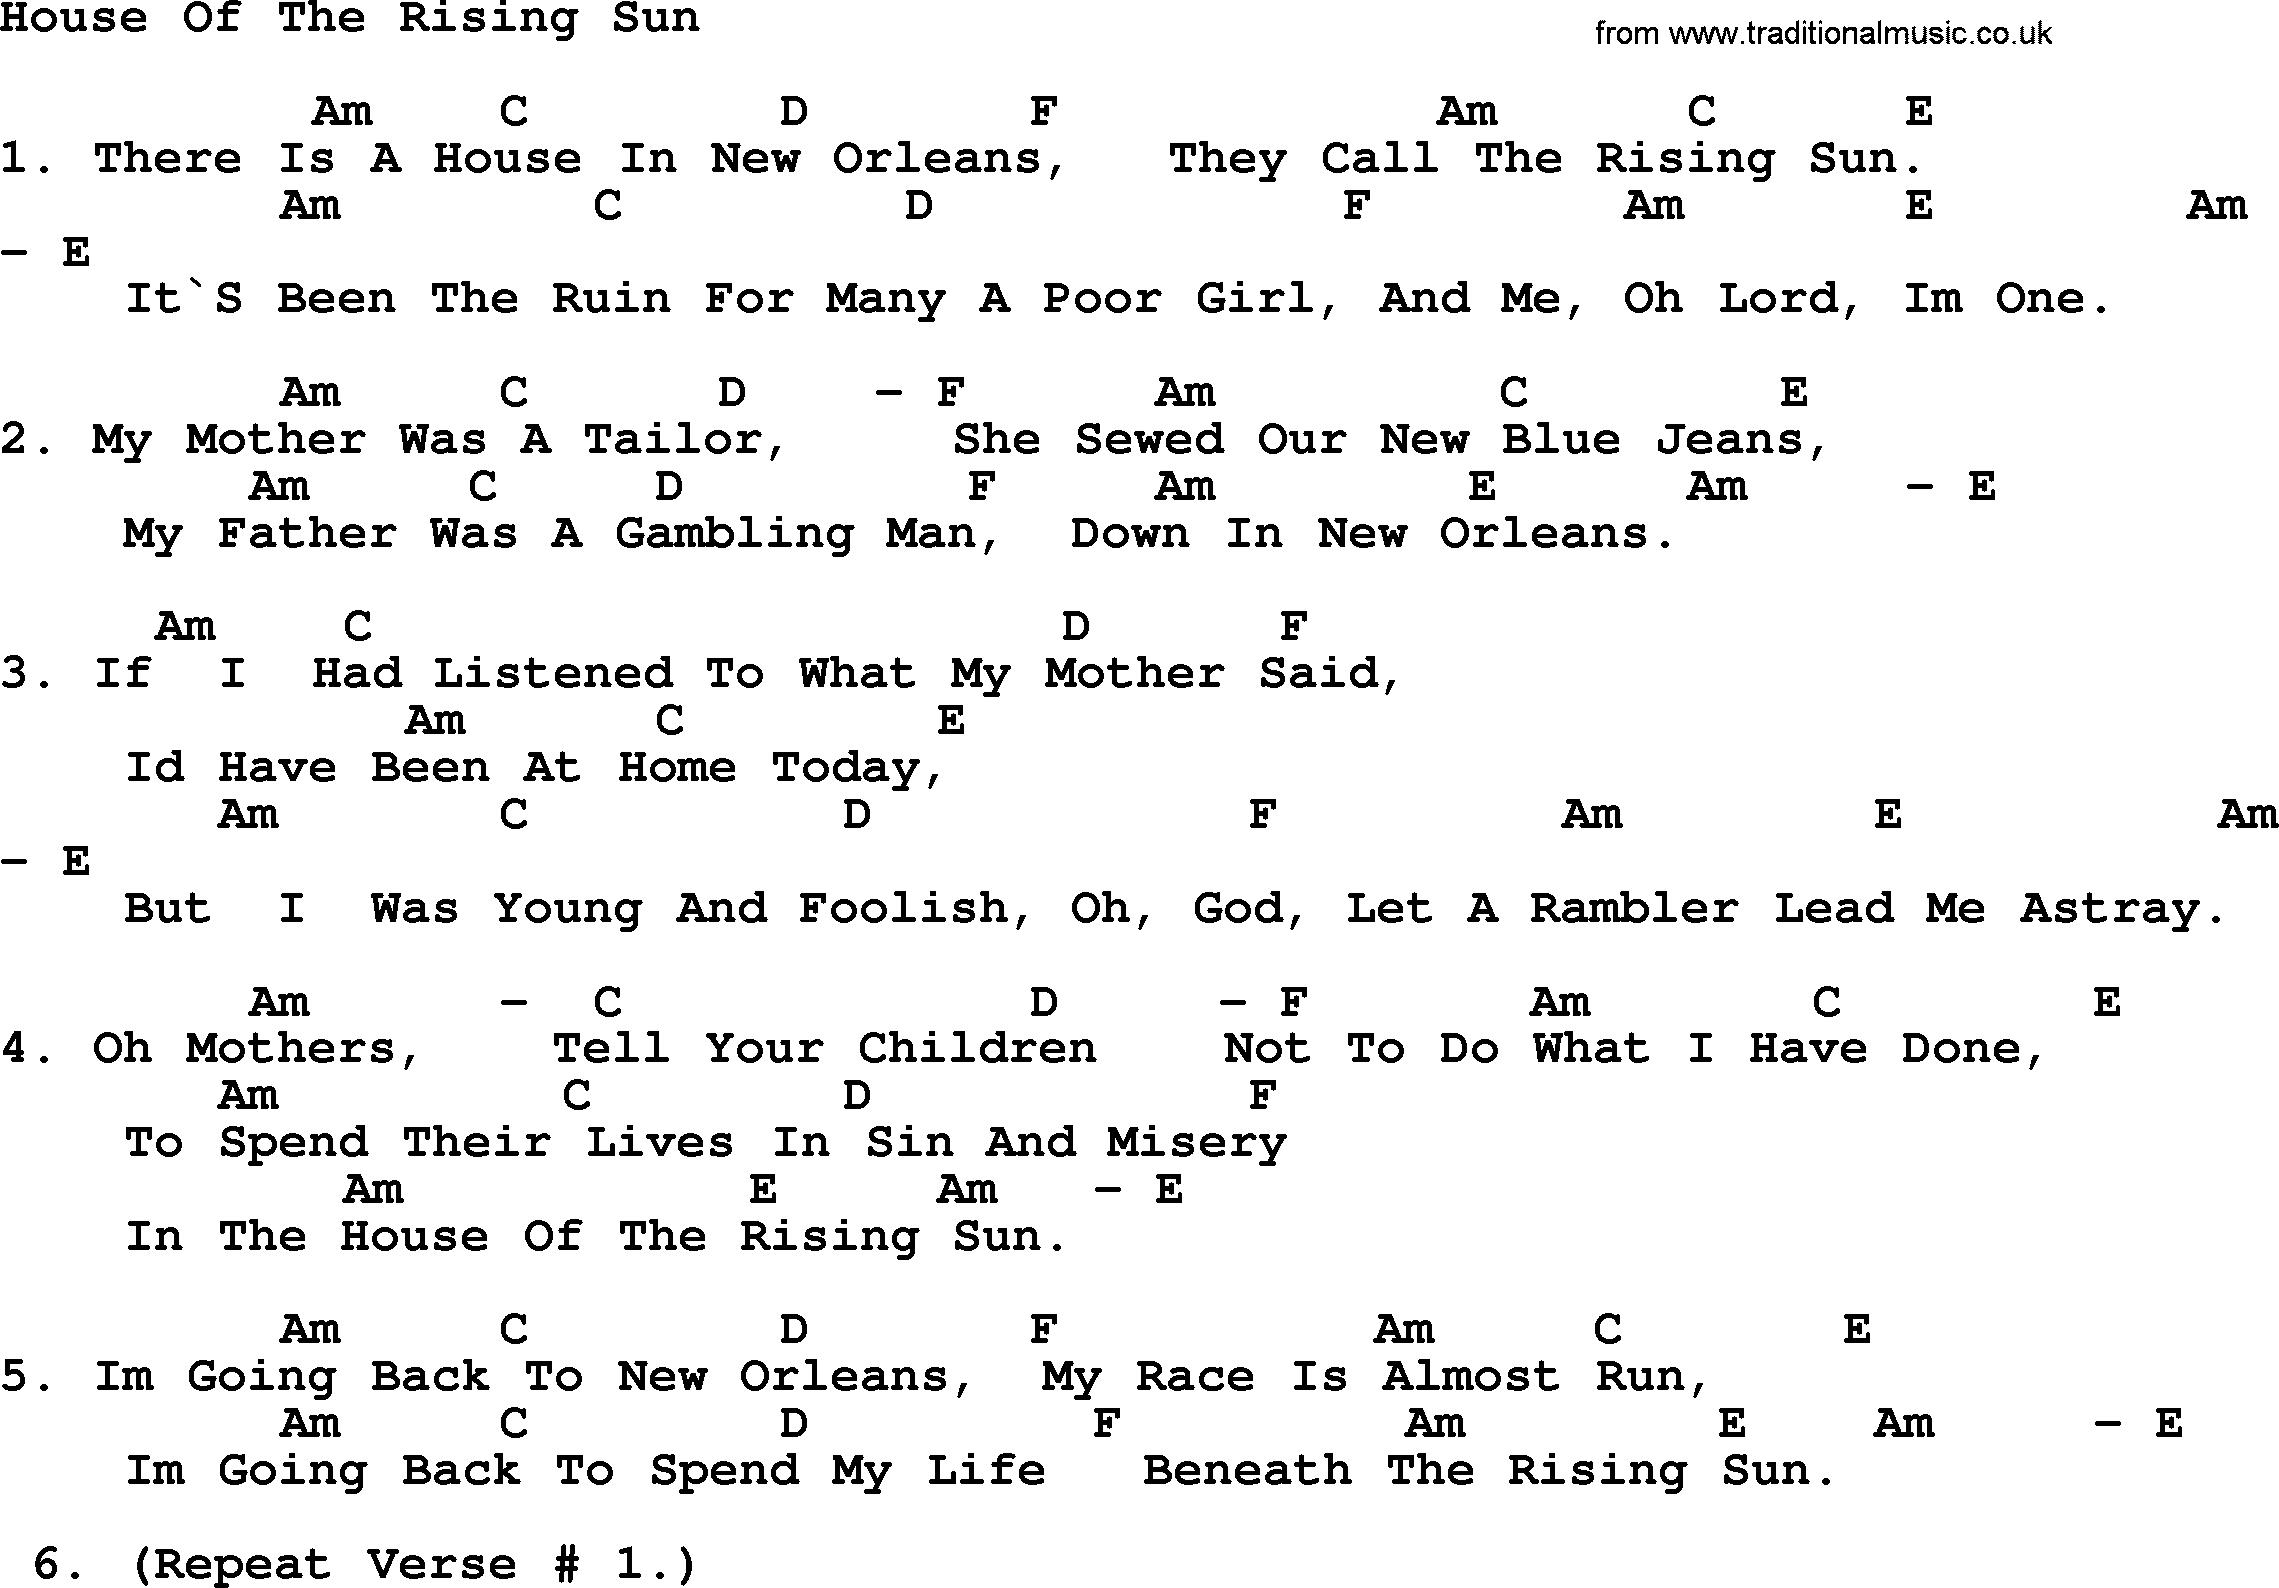 House Of The Rising Sun sheet music for guitar (chords) (PDF)